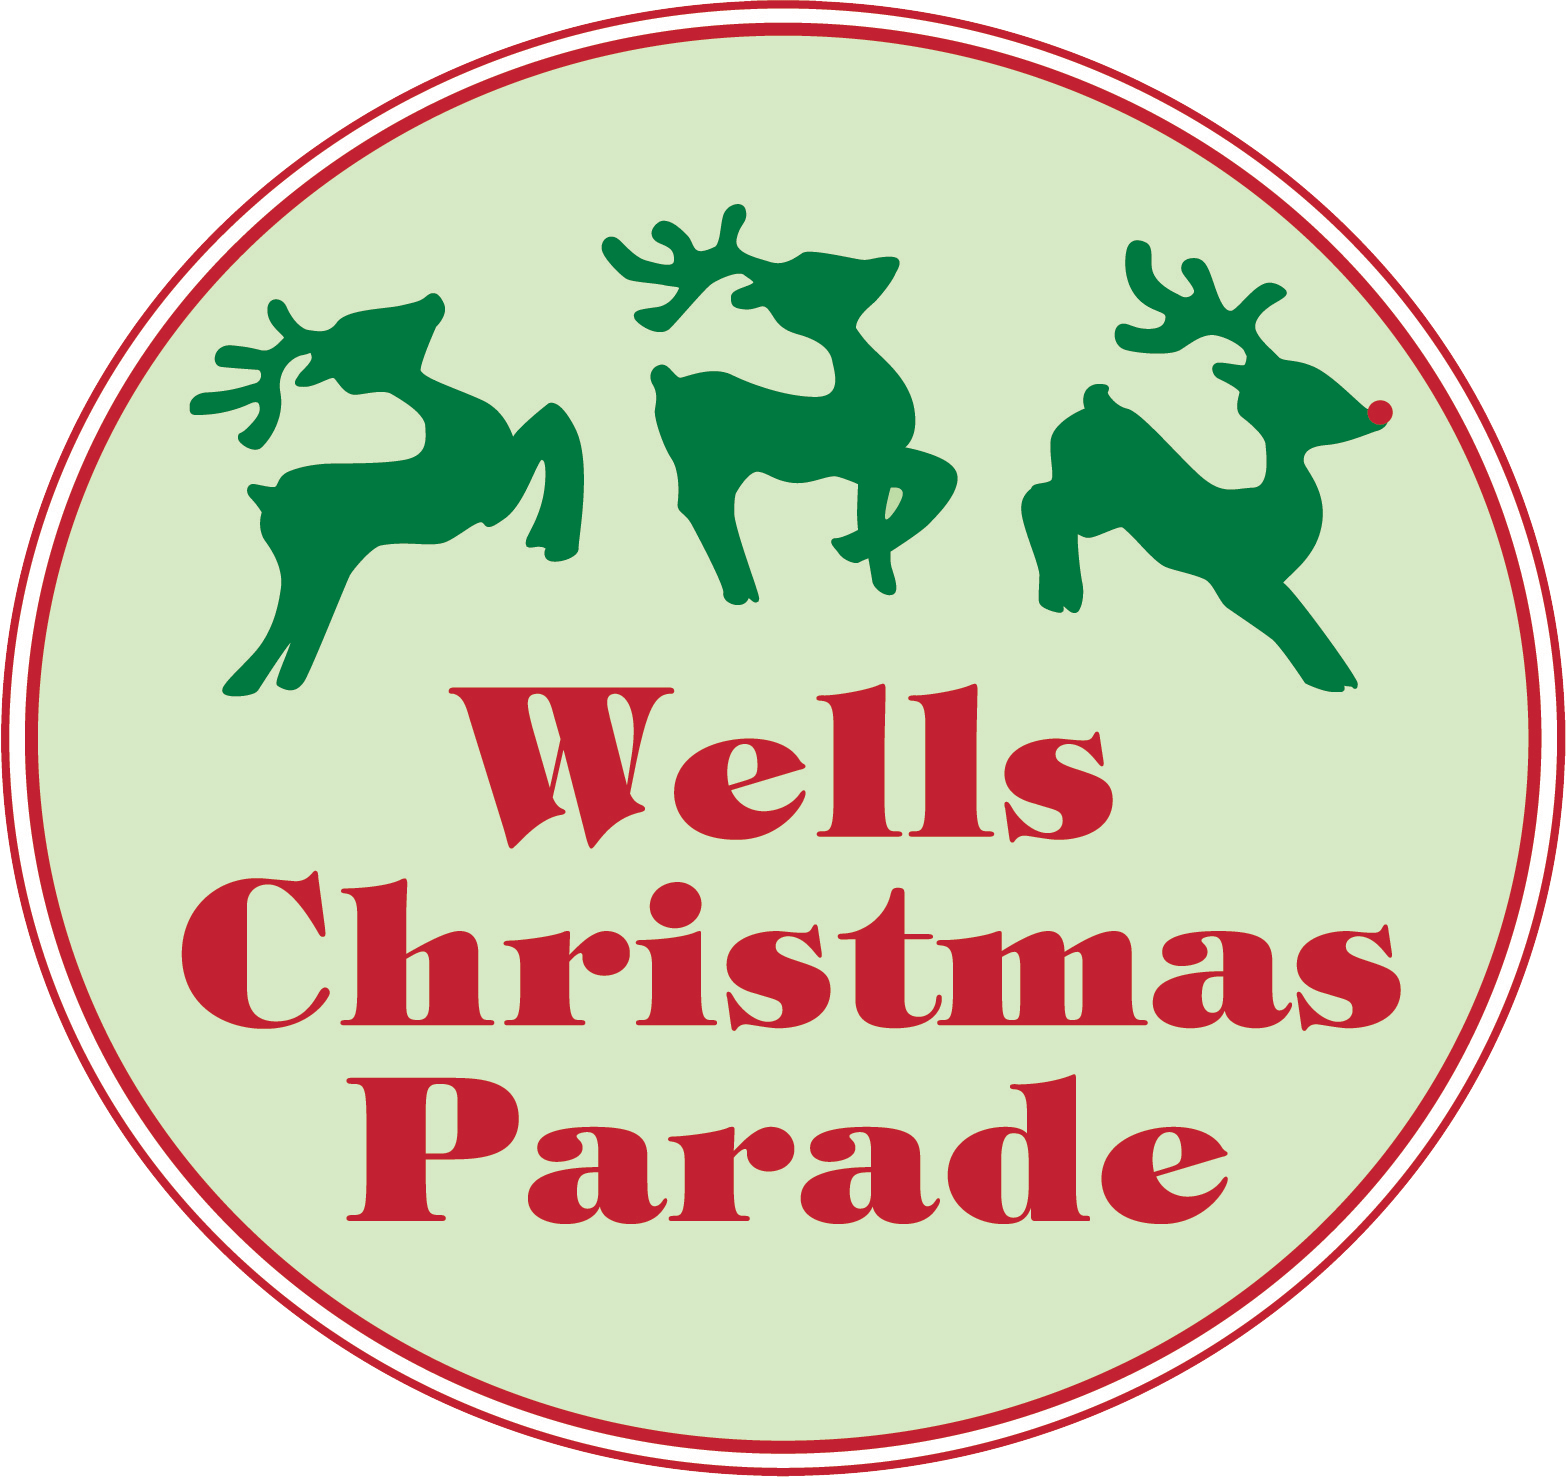 36th Annual Wells Christmas Parade on Sunday, December 12.